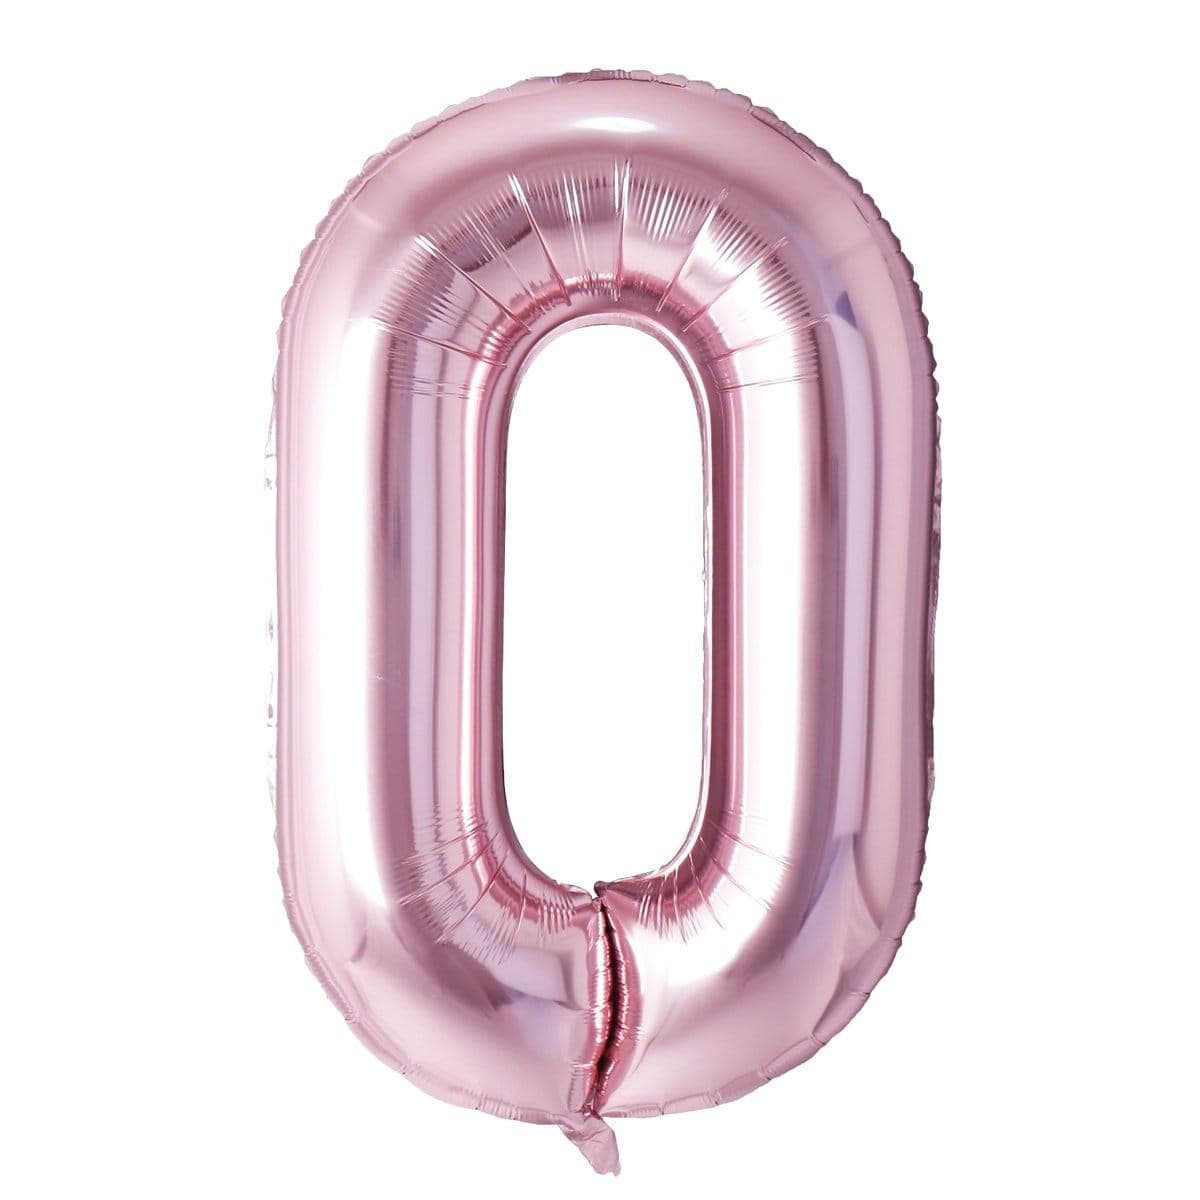 Buy Balloons Rose Gold Number 0 Foil Balloon, 34 Inches sold at Party Expert